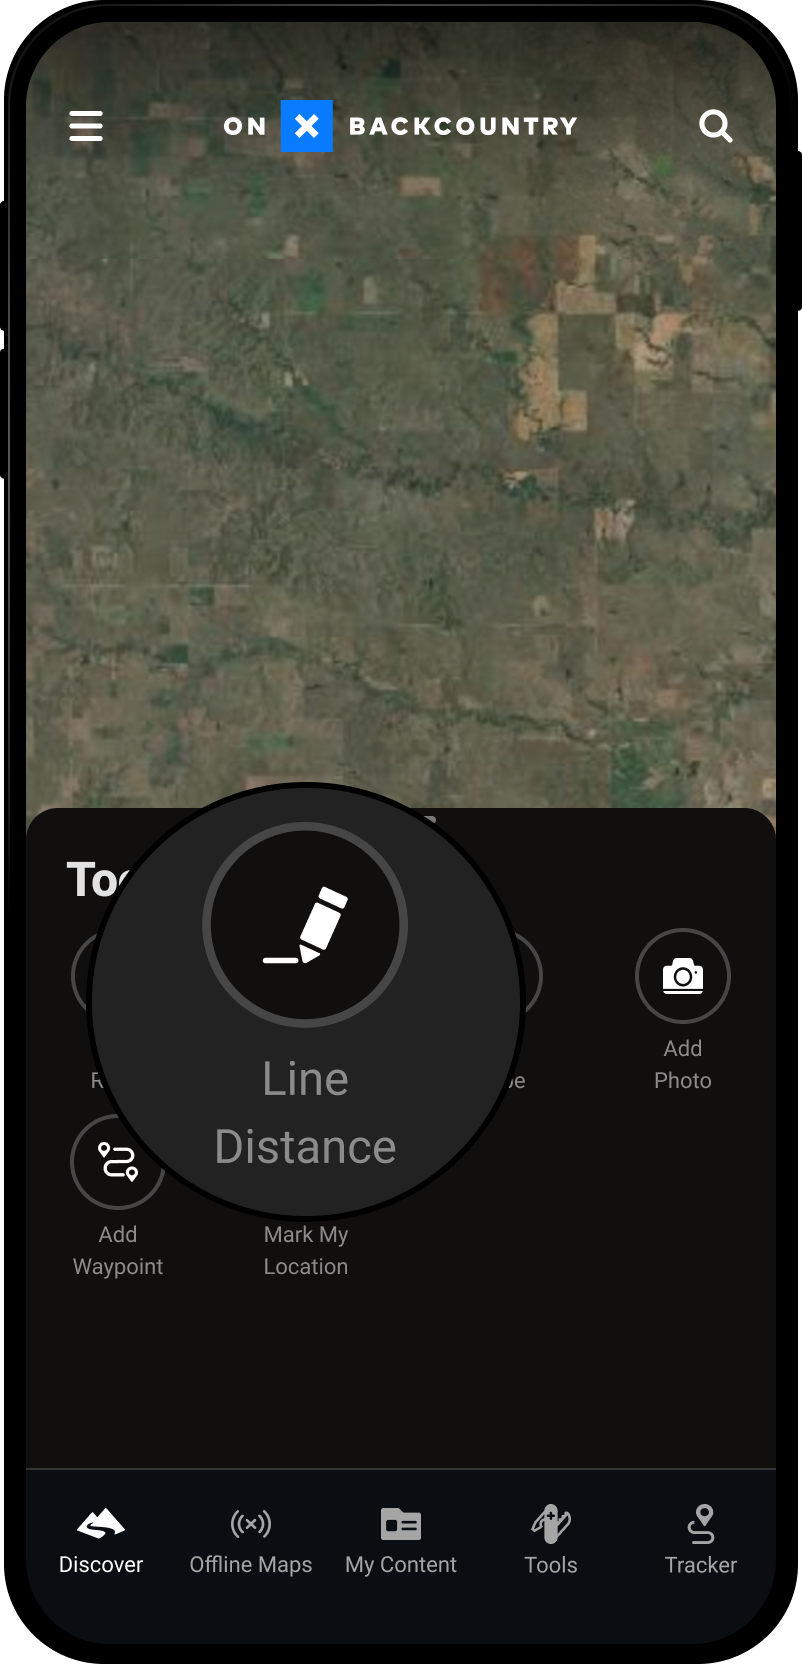 Line Distance Tools Menu Backcountry App.png